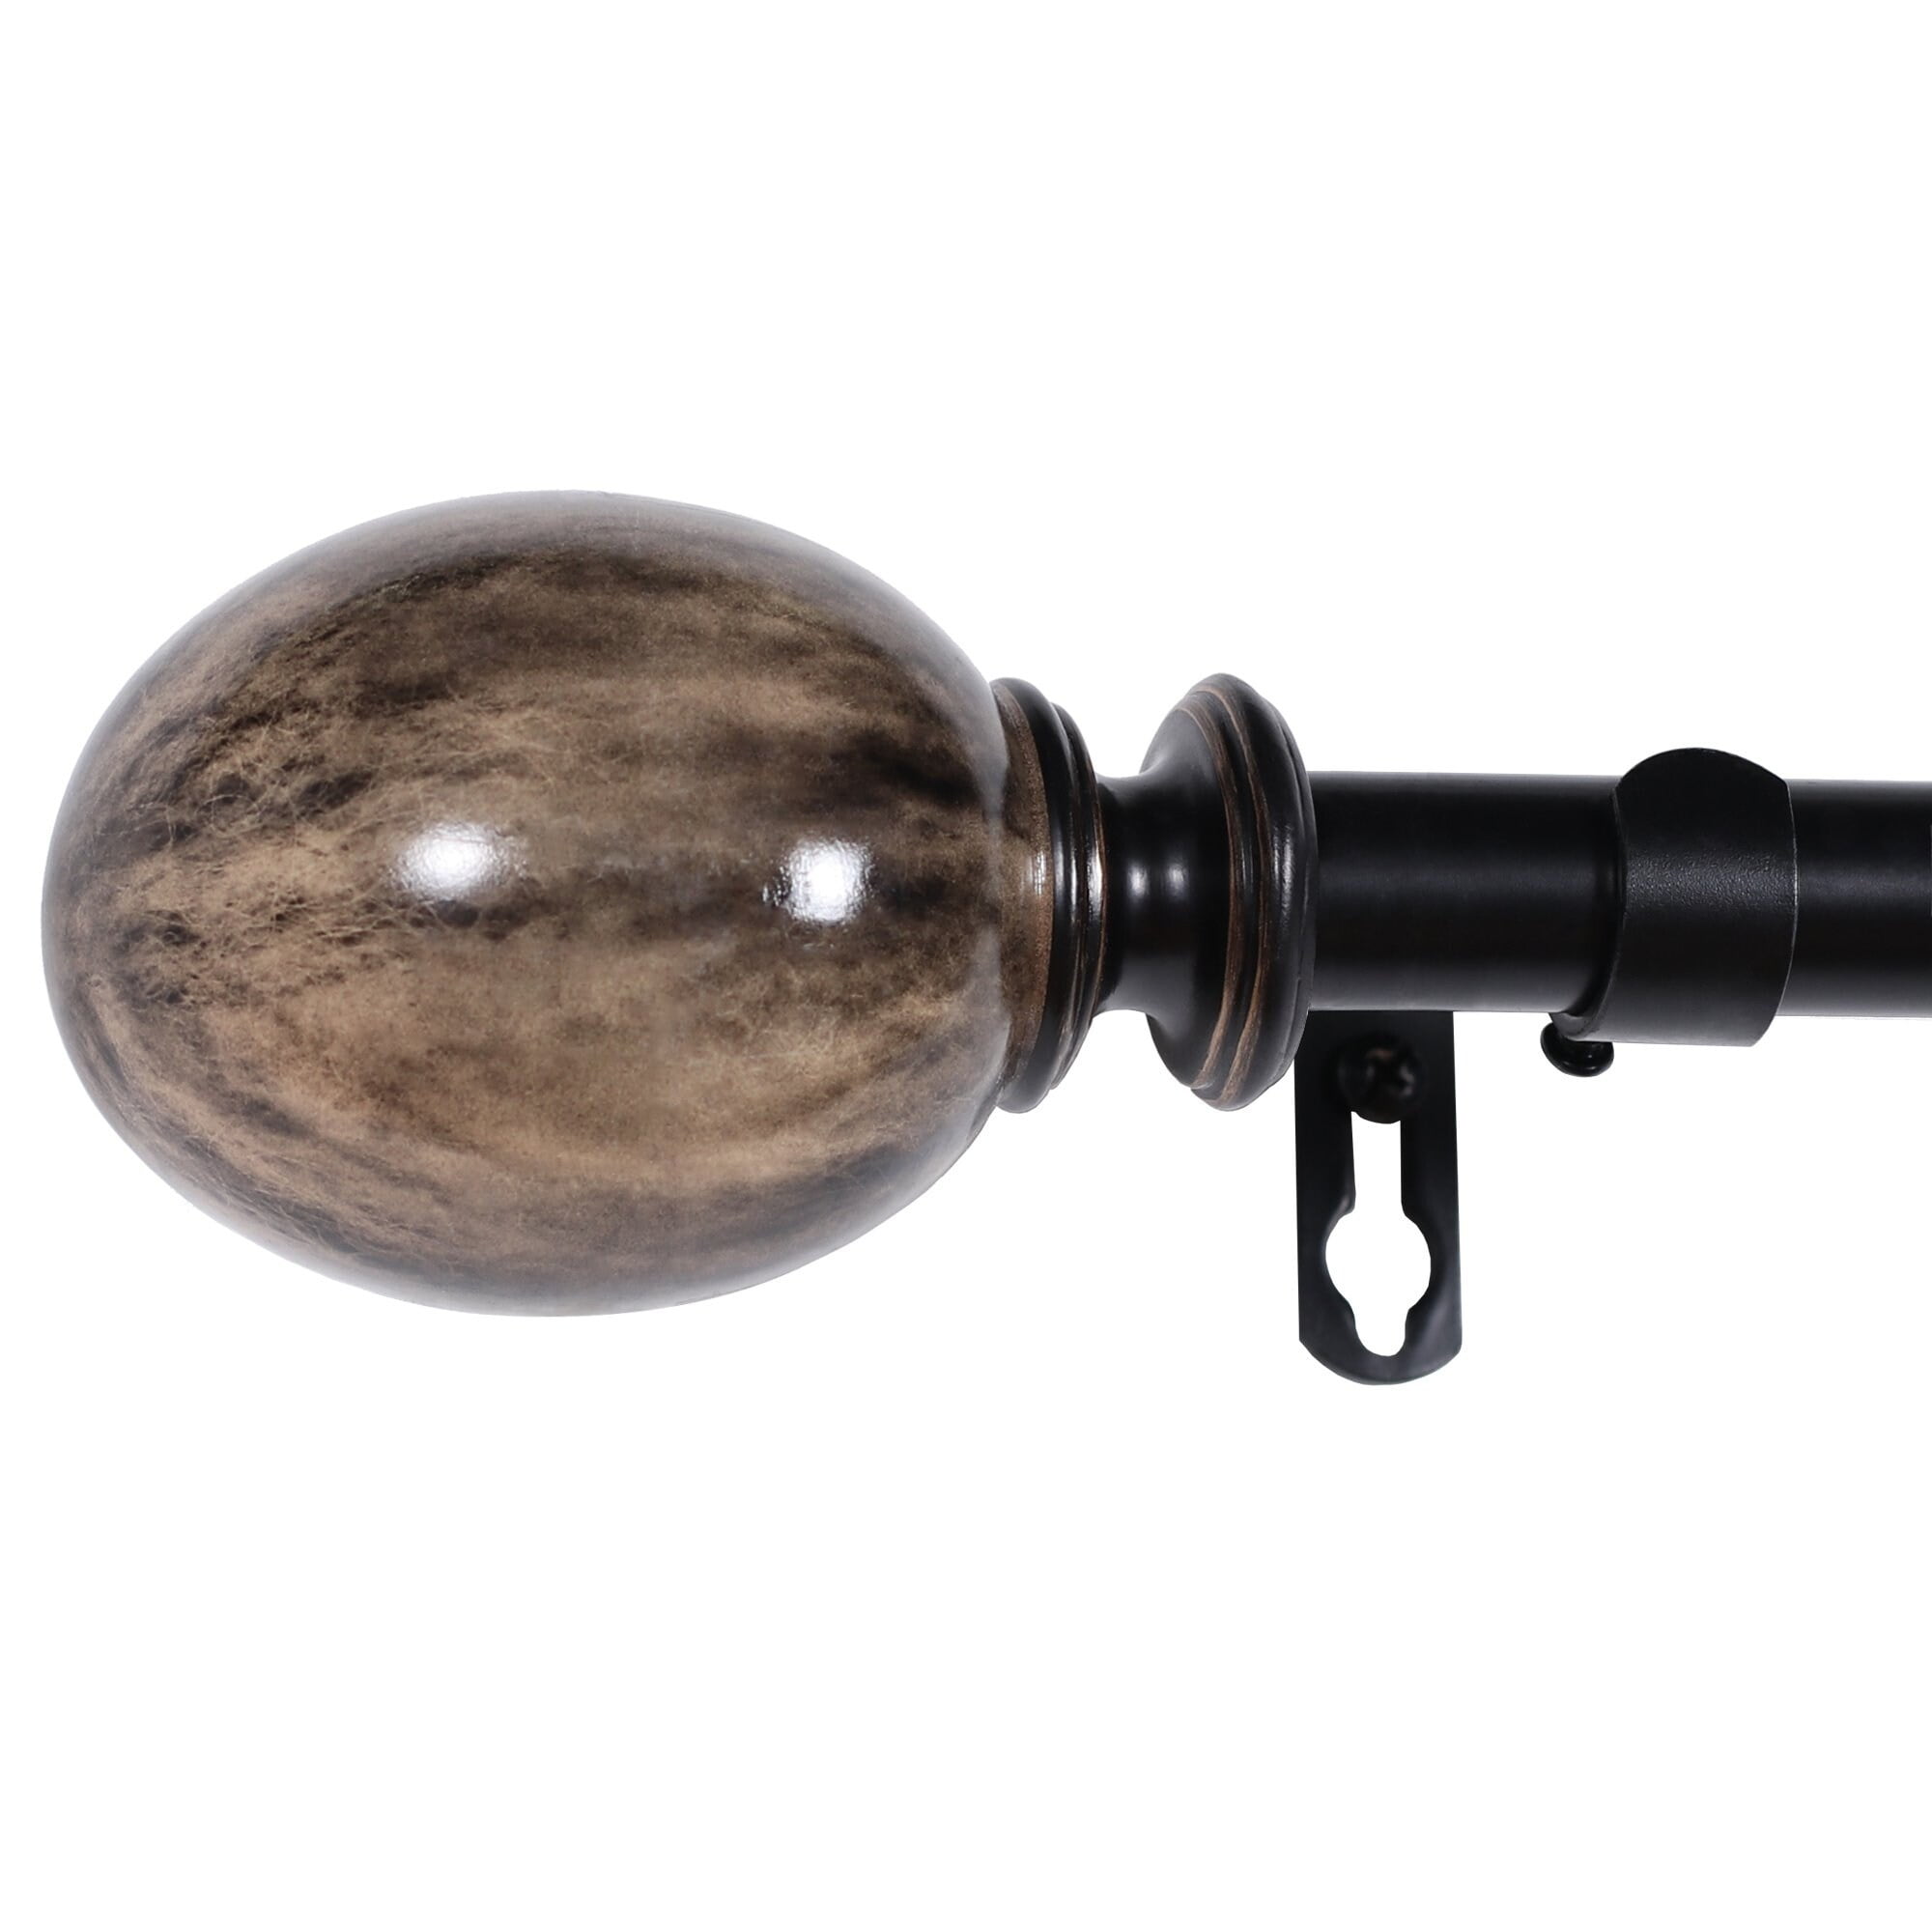 Oil Rubbed Bronze NEW Telescoping Marble Ball Single Blind Rod Set 